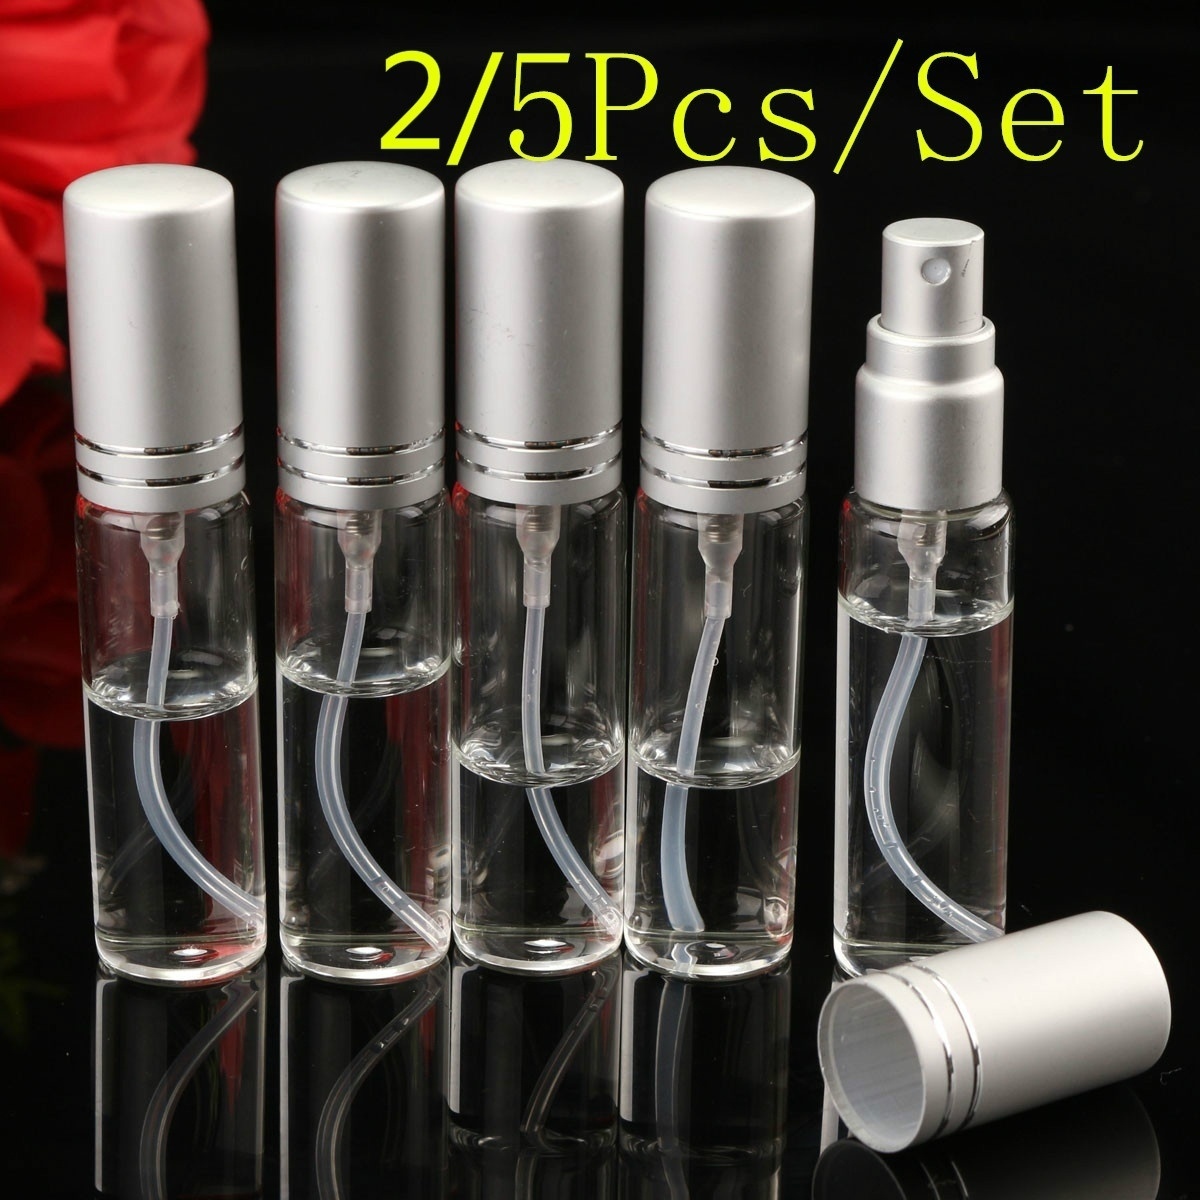  100Pcs 3ml 5ml 7ml 10ml Portable Mini Refillable Clear Glass  Empty Sample Perfume Bottles Cosmetic Atomizers Spray Bottle Container for  Travel Party Must Makeup Tools (10ML) : Beauty & Personal